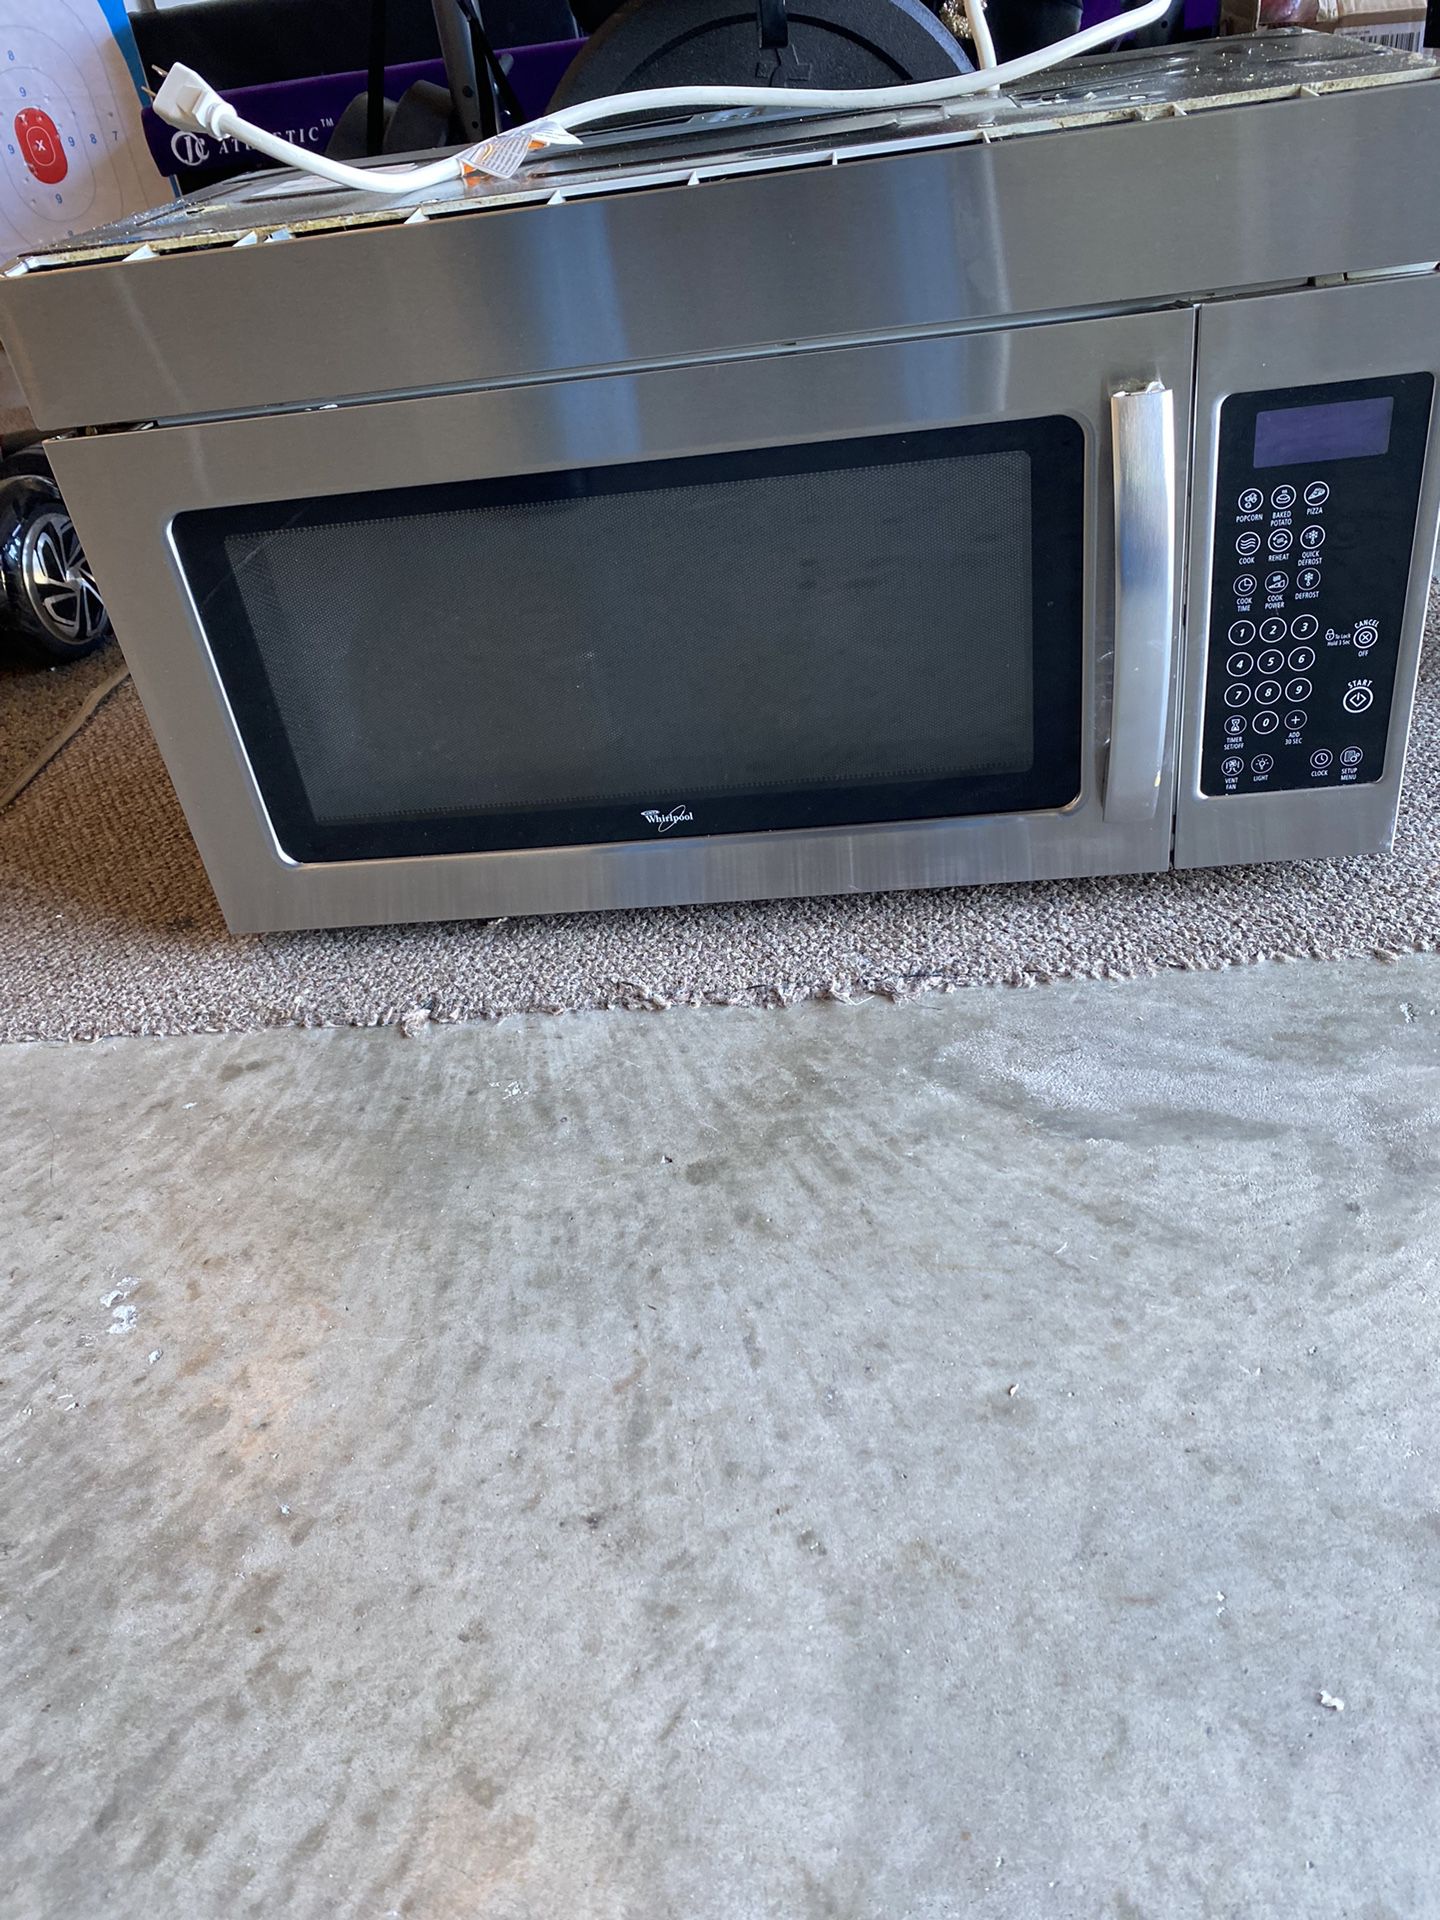 Whirlpool Stainless Steel Microwave, Stove With Glass Top, And Dishwasher / White Magic Chef Refrigerator 